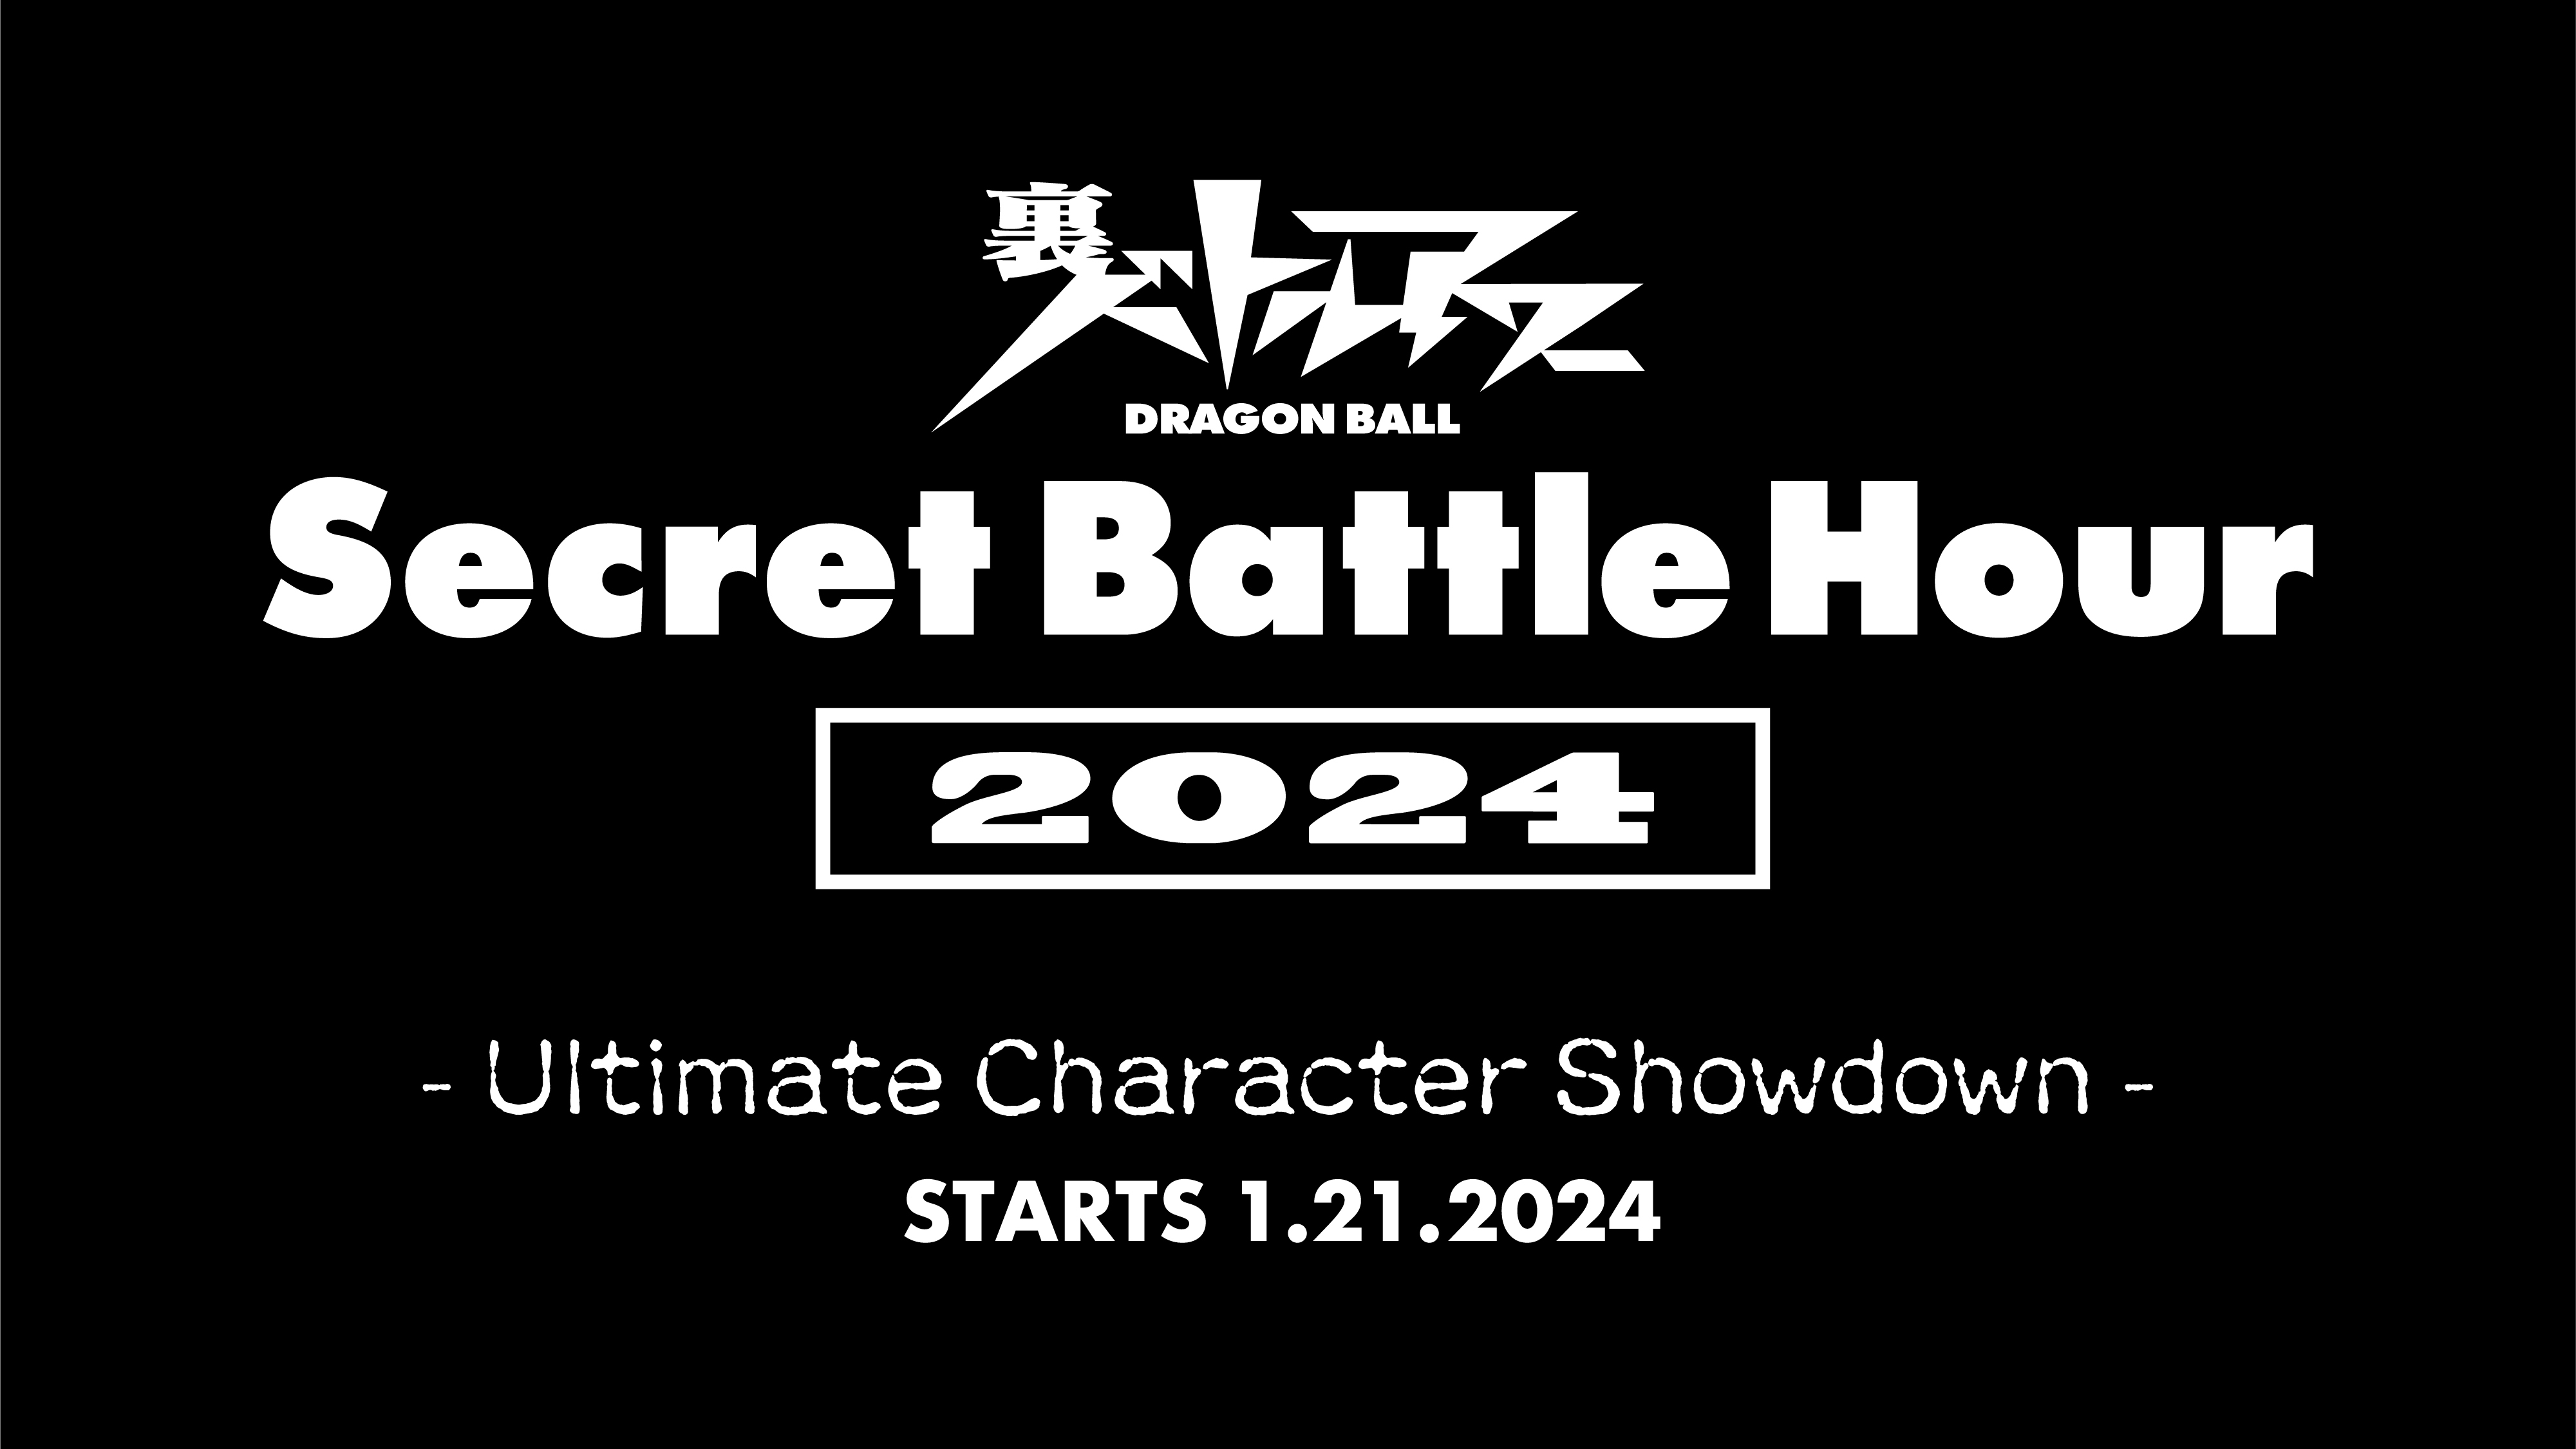 DRAGON BALL OFFICIAL on X: The ultimate character showdown  #DragonBallSecretBattleHour is back in 2024! It will feature 20 fighters  from the Dragon Ball Super manga, which released its 100th chapter in V